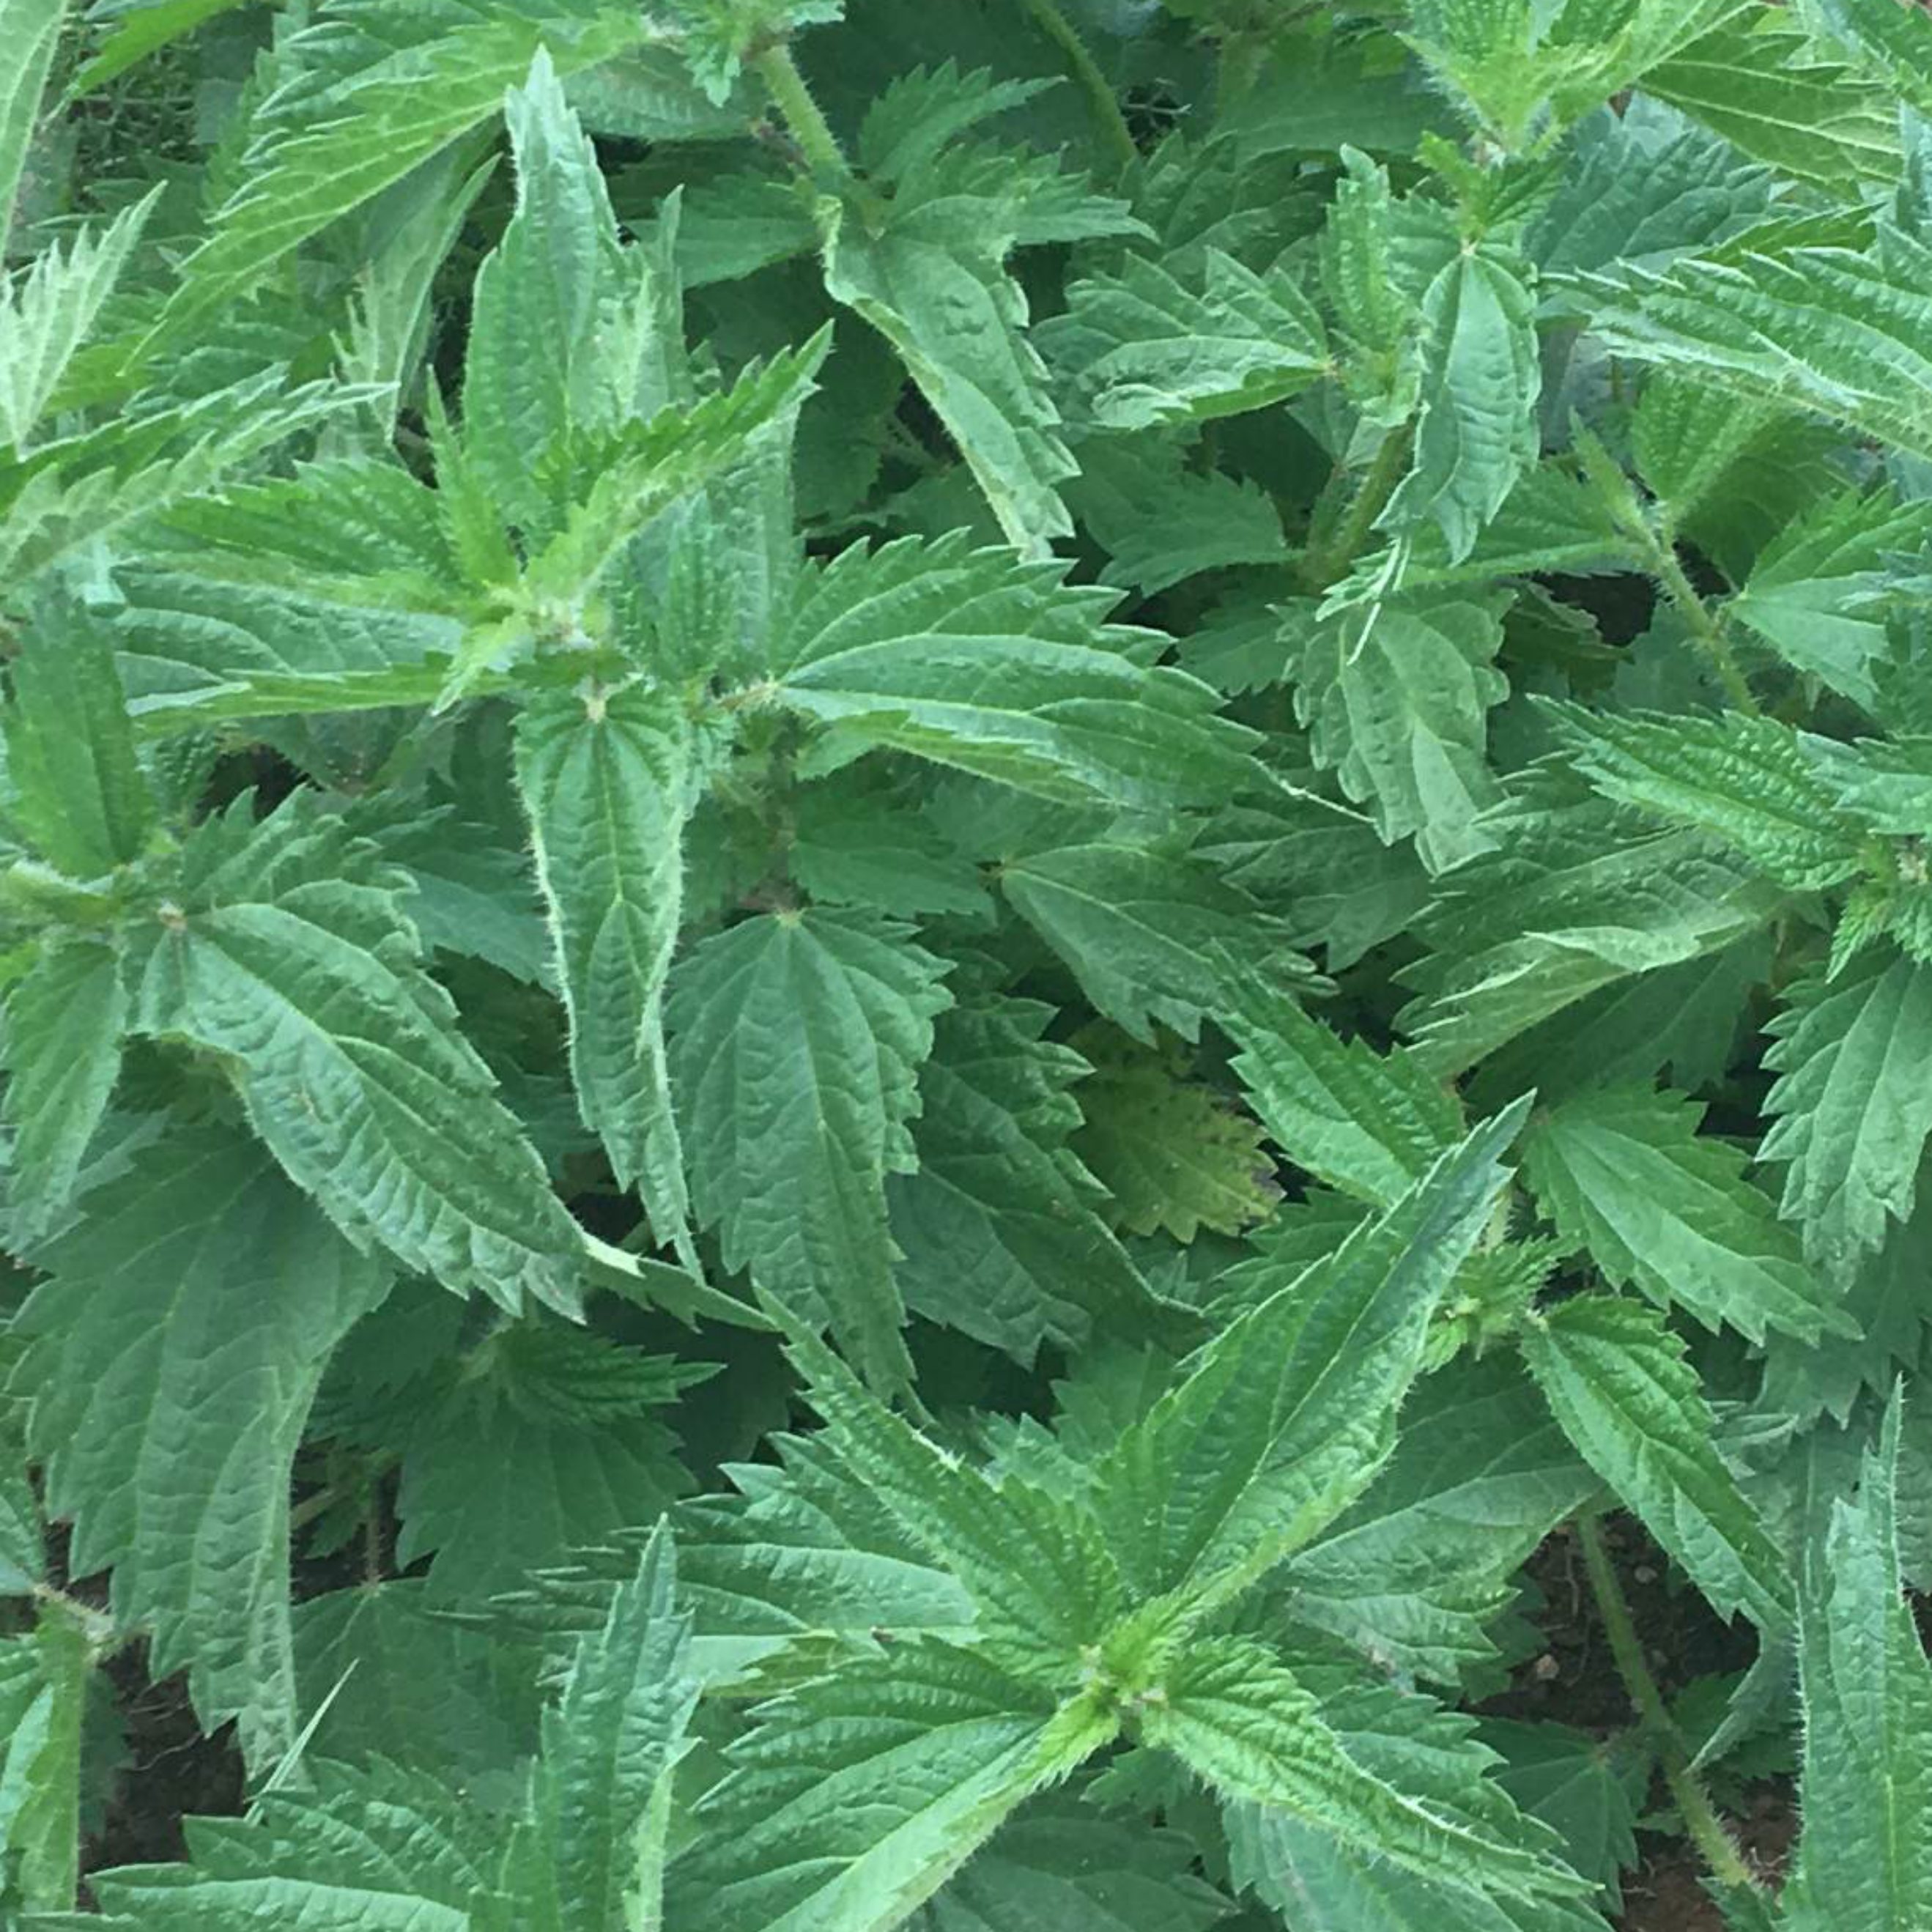 Common nettle leaves cultivation